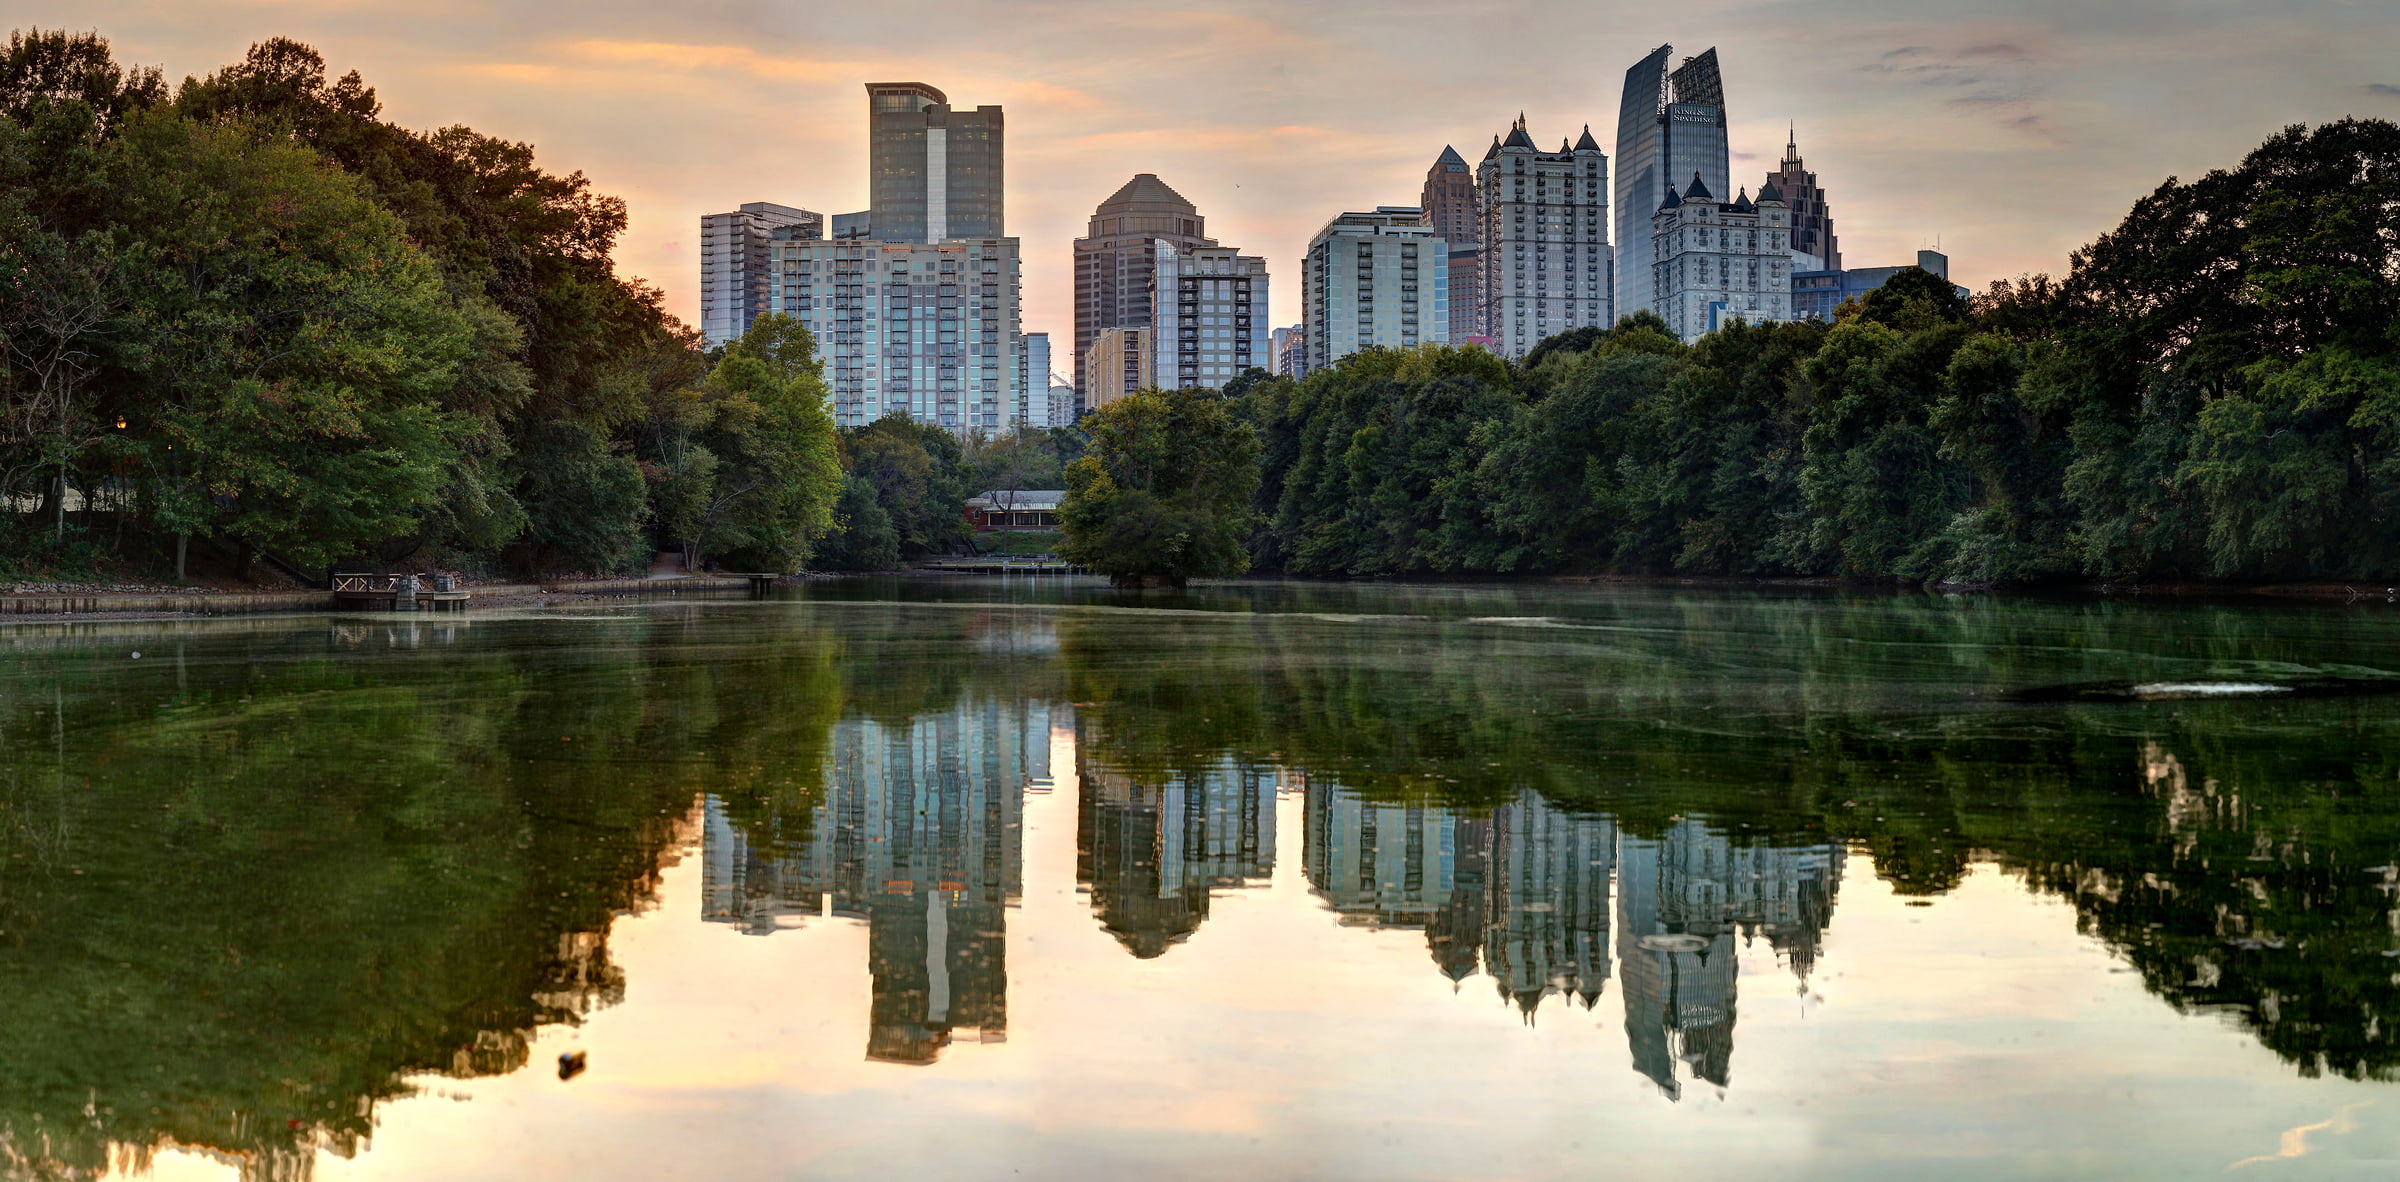 443 megapixels! A very high resolution, large-format VAST photo print of Piedmont Park; photograph created by Phil Crawshay in Piedmont Park, Atlanta, Georgia.